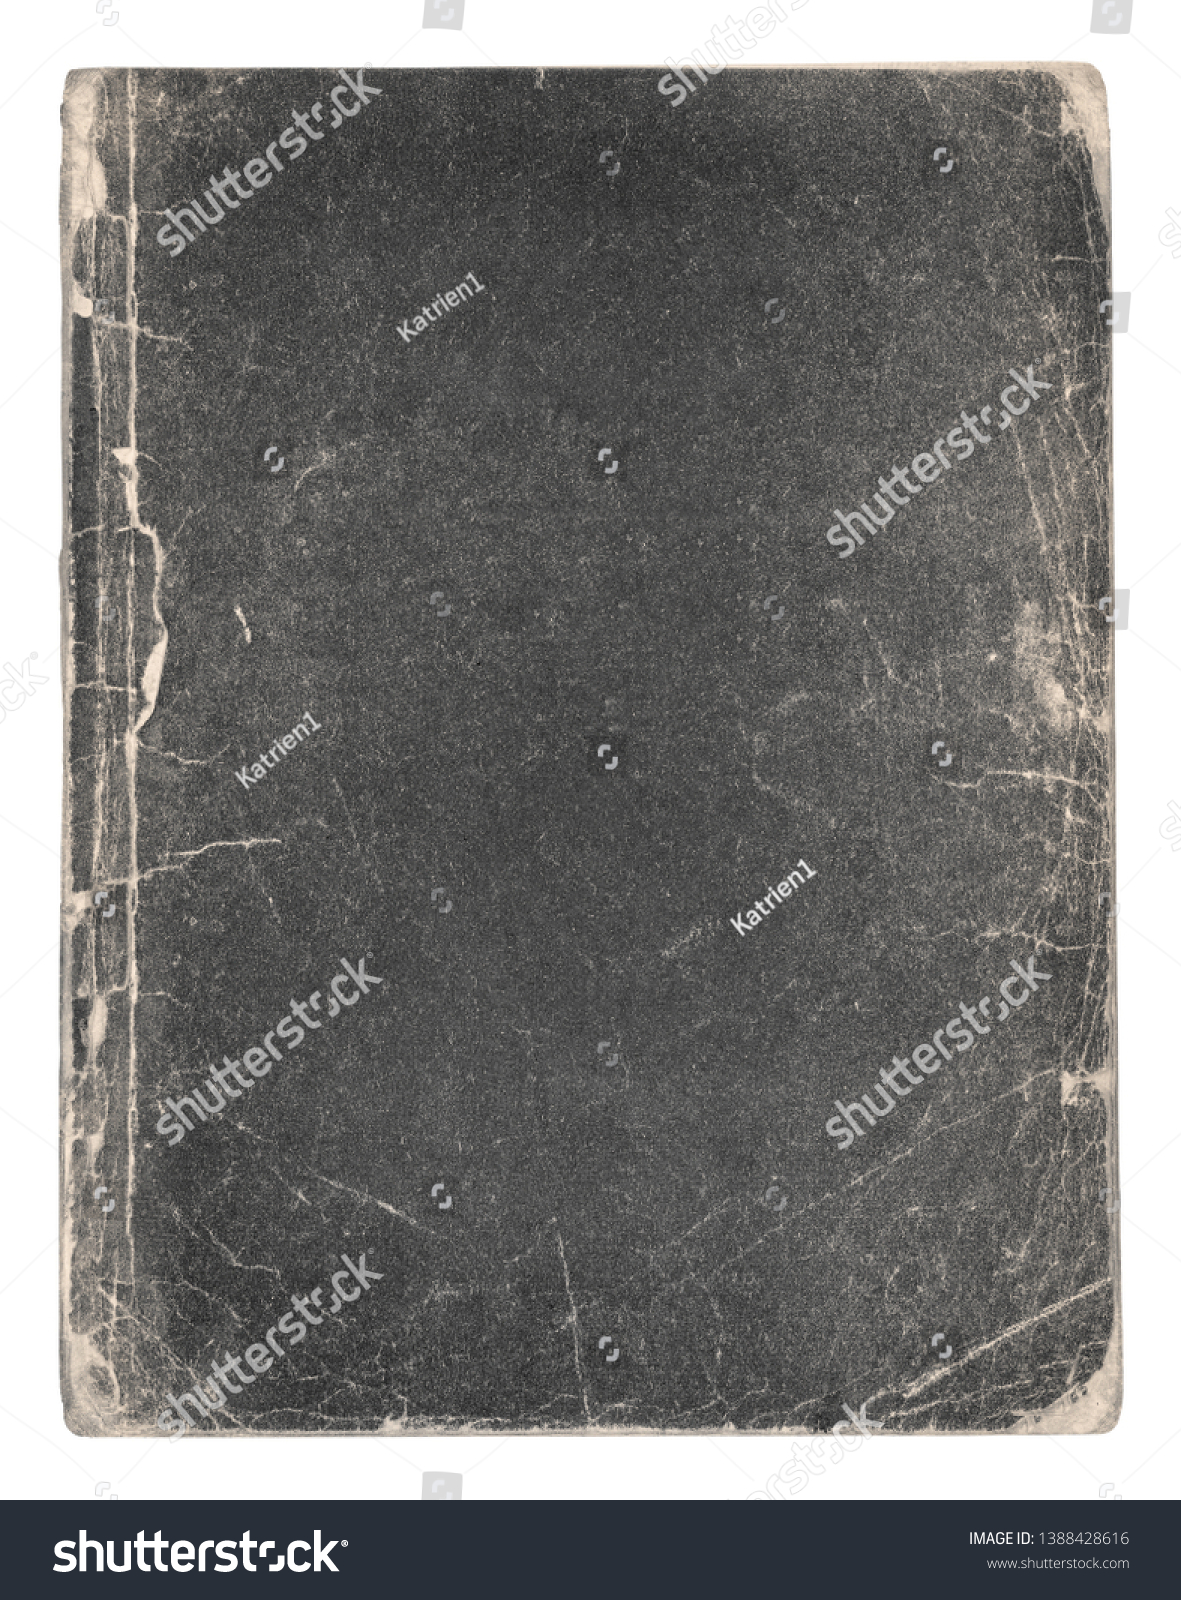 Old vintage book isolated on white background #1388428616